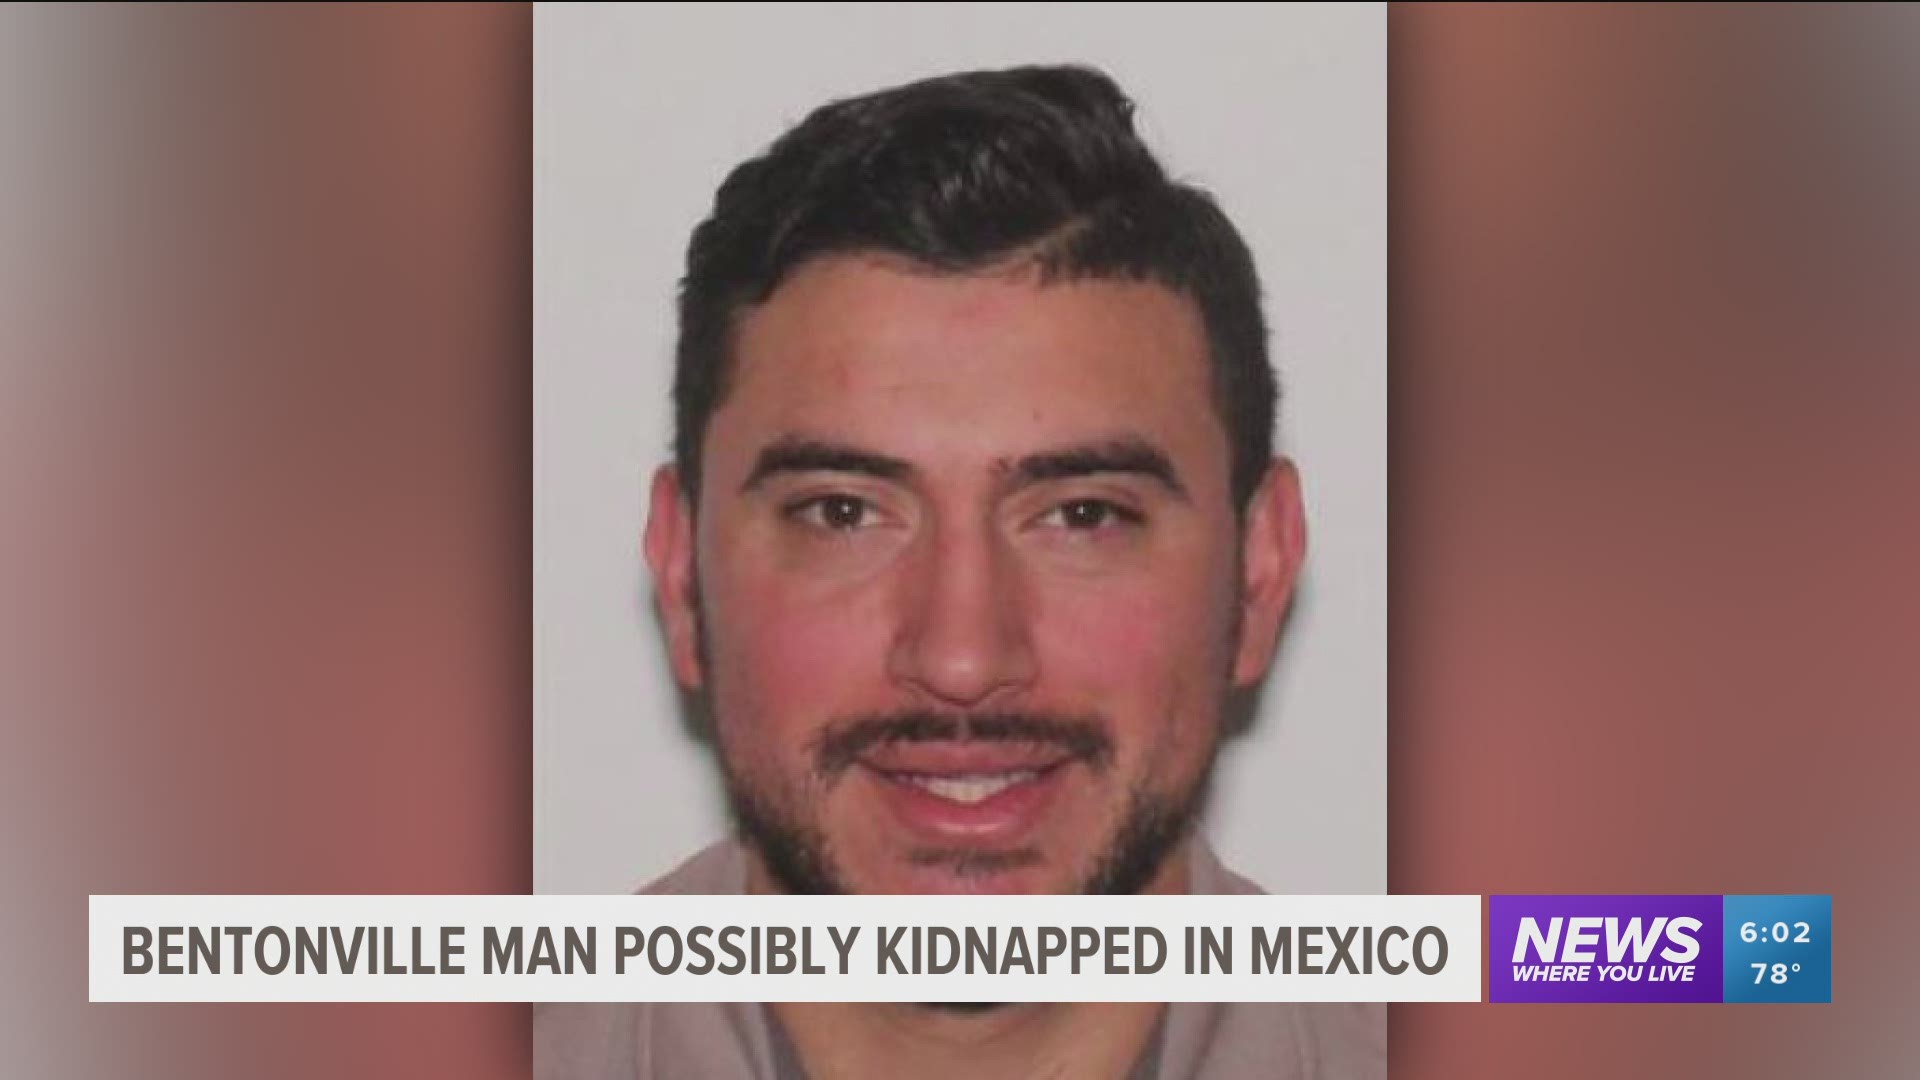 Luis Davila, 31, has not been seen since traveling to Mexico to visit his girlfriend on March 29, 2021. Authorities believe he may be the victim of a kidnapping.